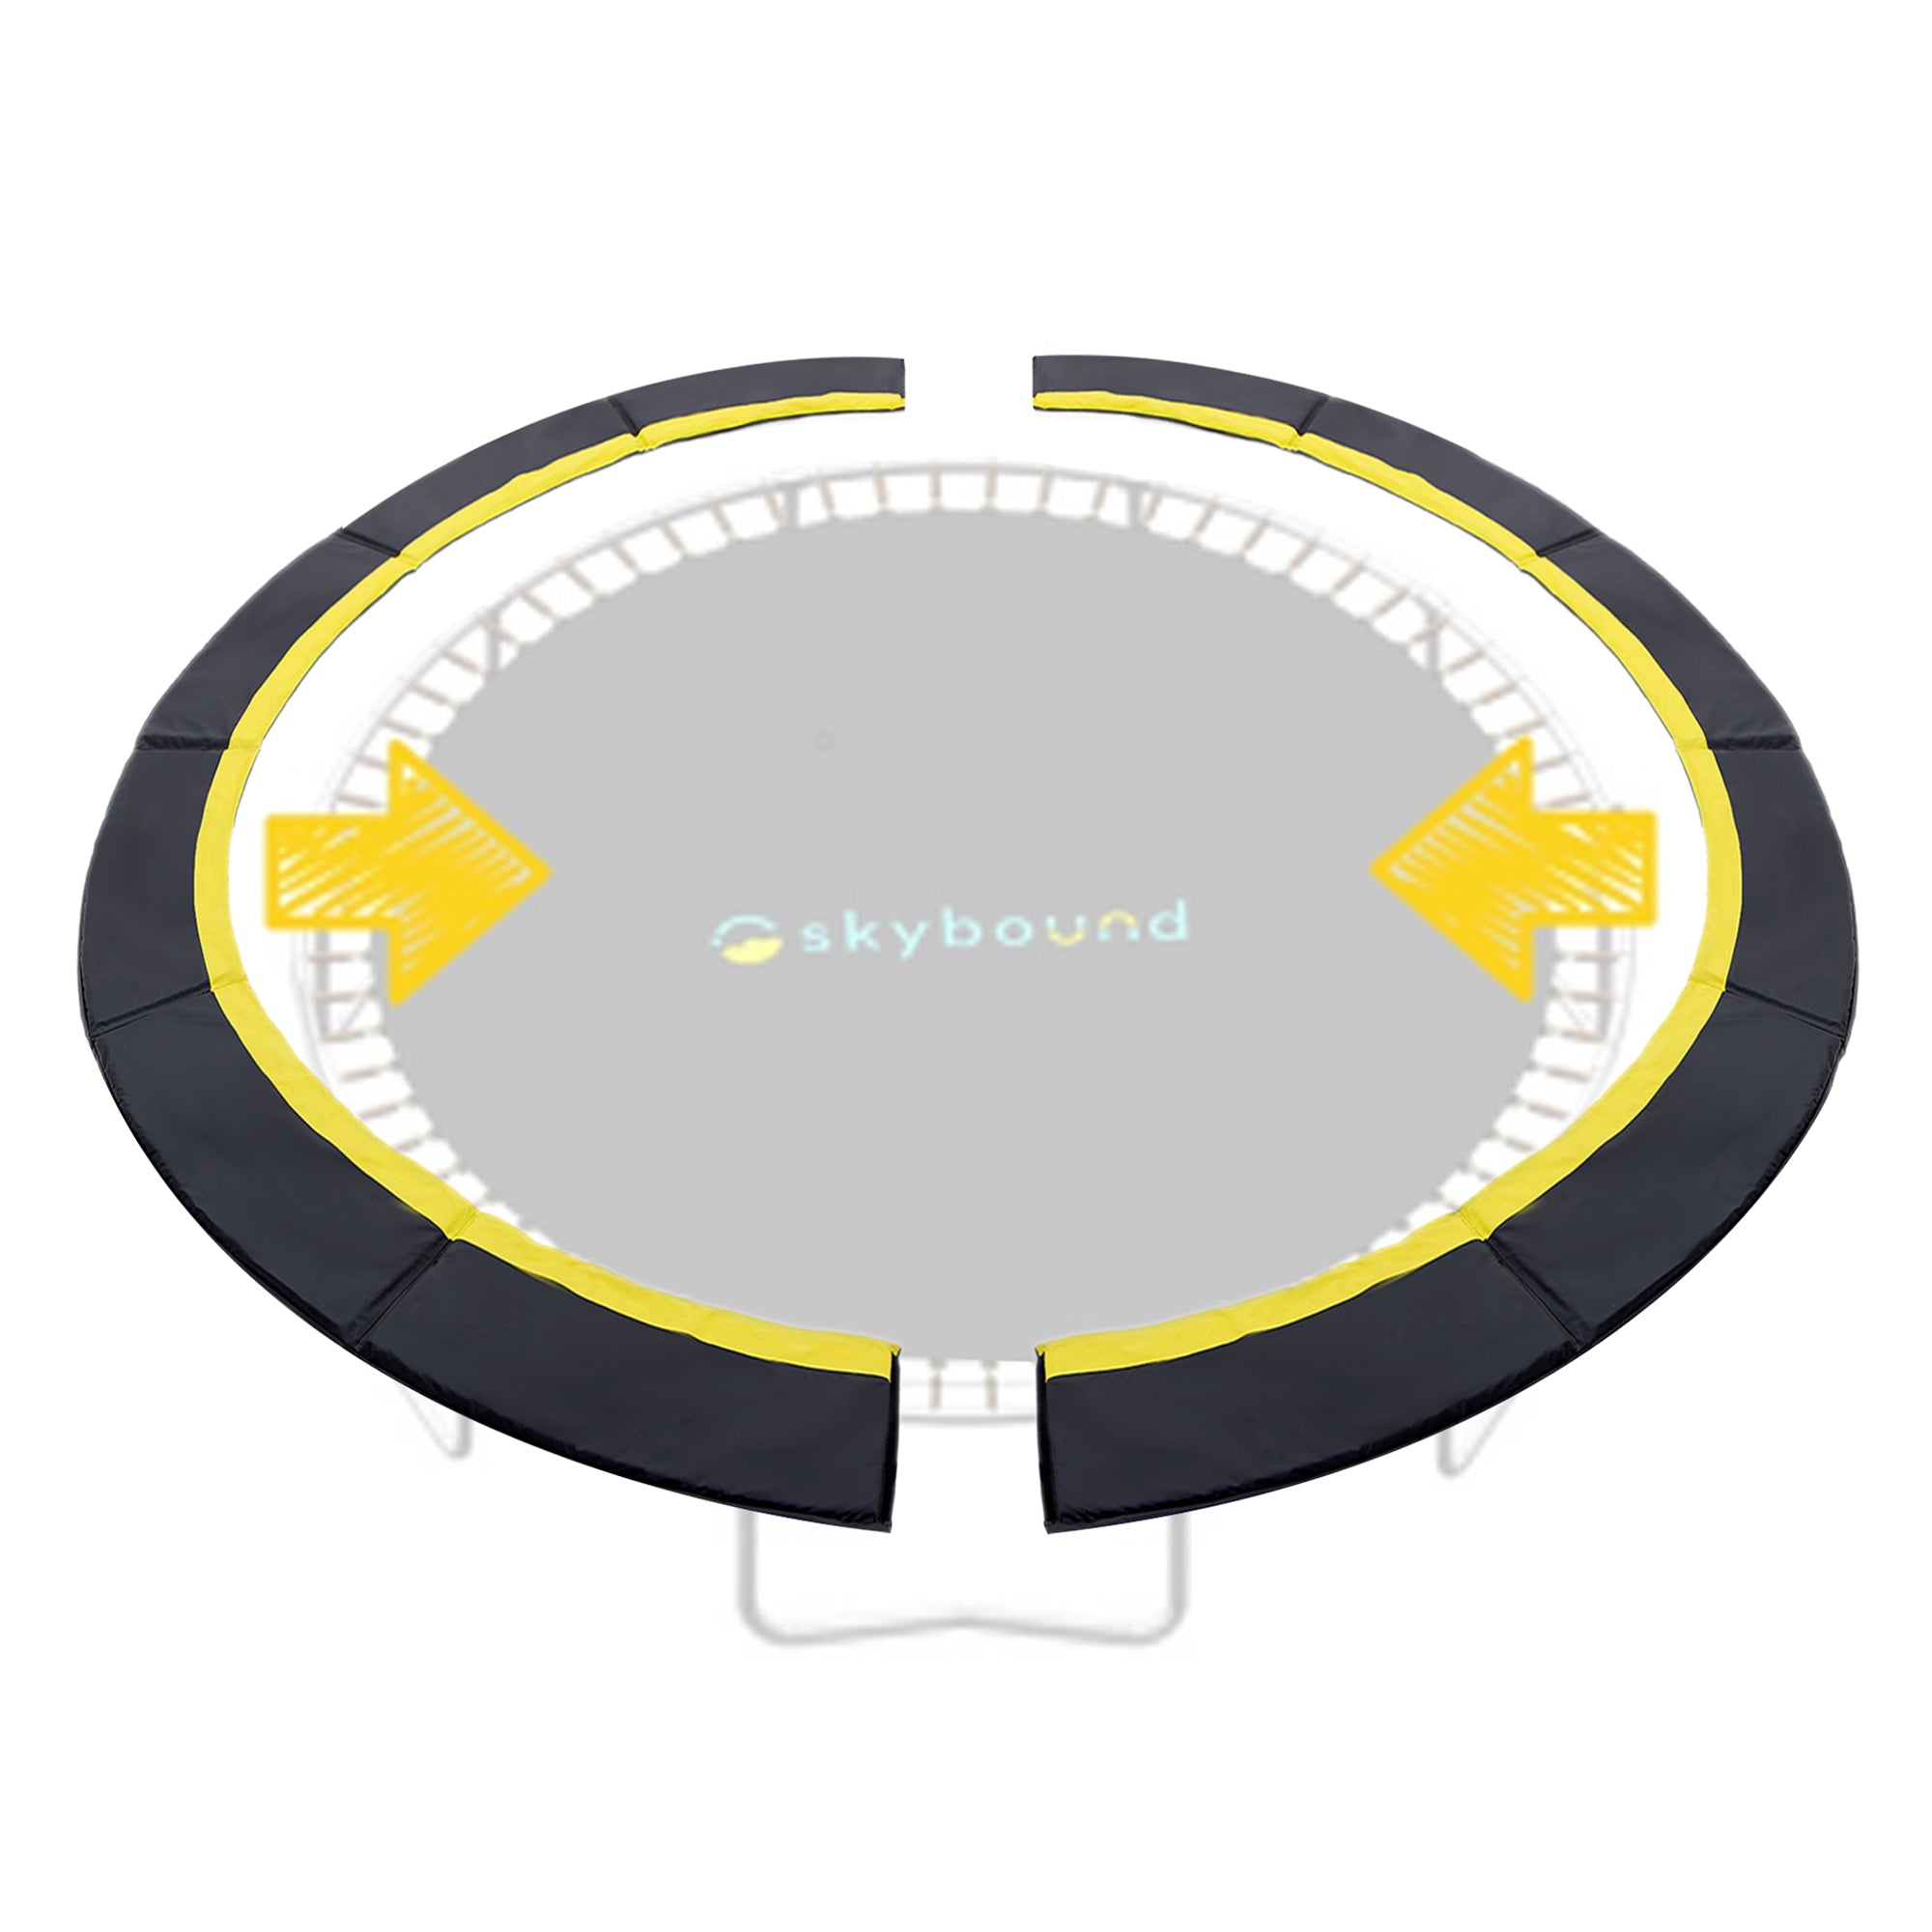 SkyBound Universal Replacement Trampoline Safety Pad - Extra Thick Foam Pad, Comfortable, Long Lasting, and Water-Resistant - Black/Yellow Color - 12ft